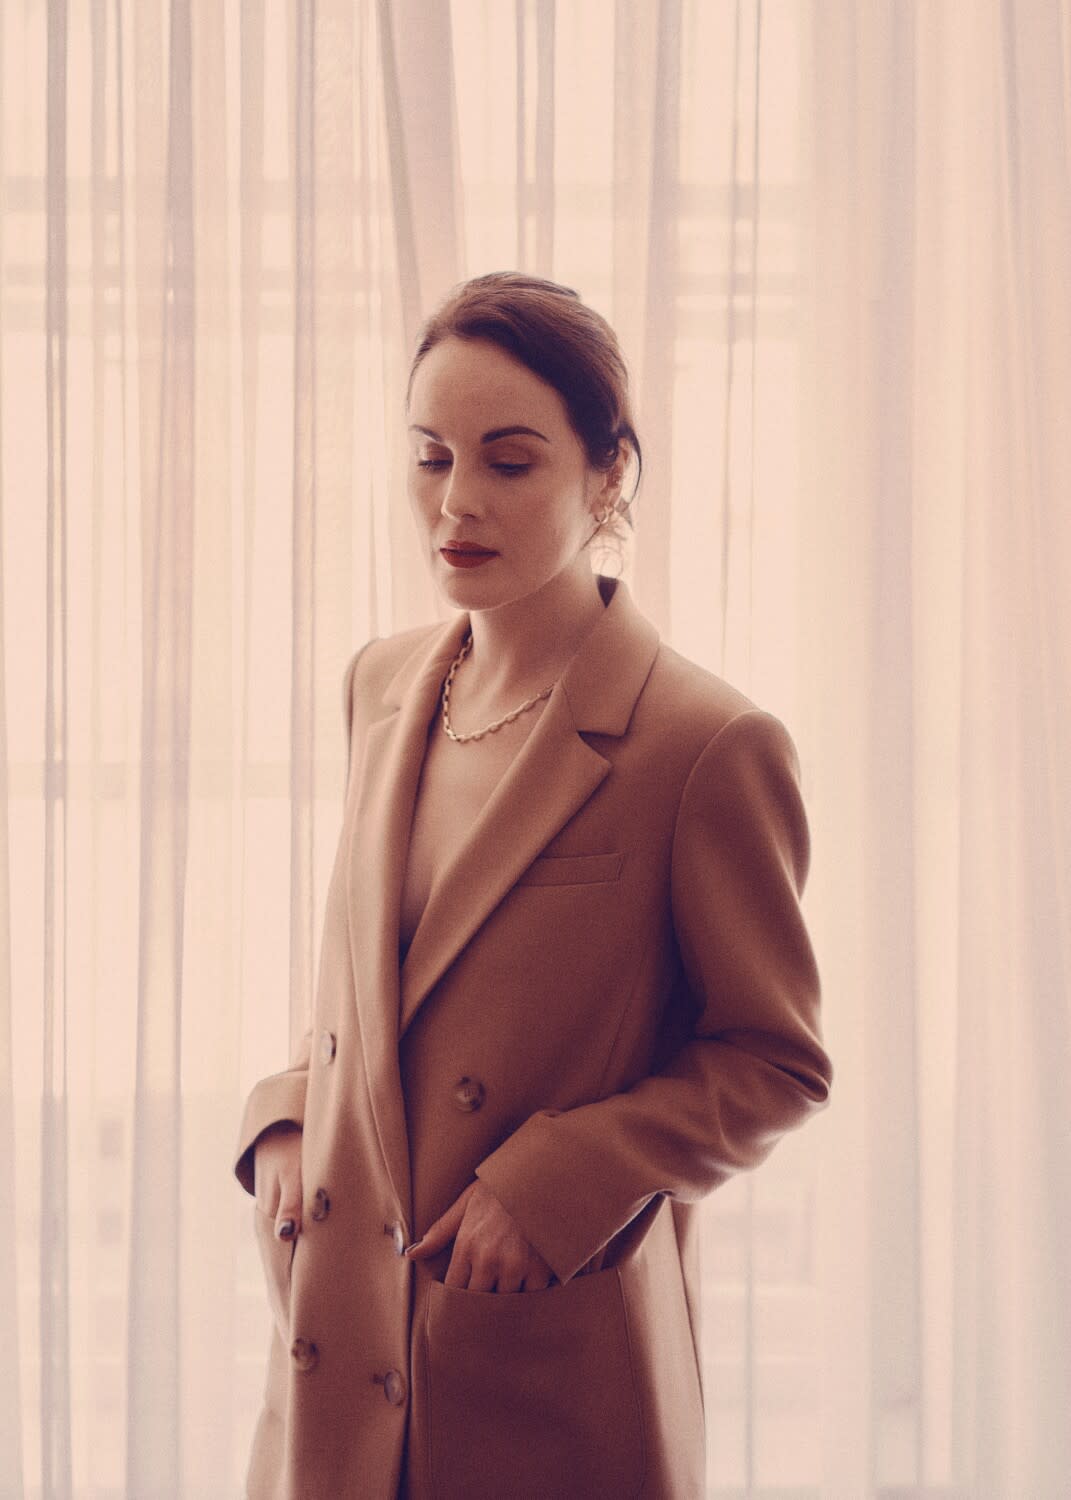 A woman stands in front of sheer curtains with her hands in her coat pockets.